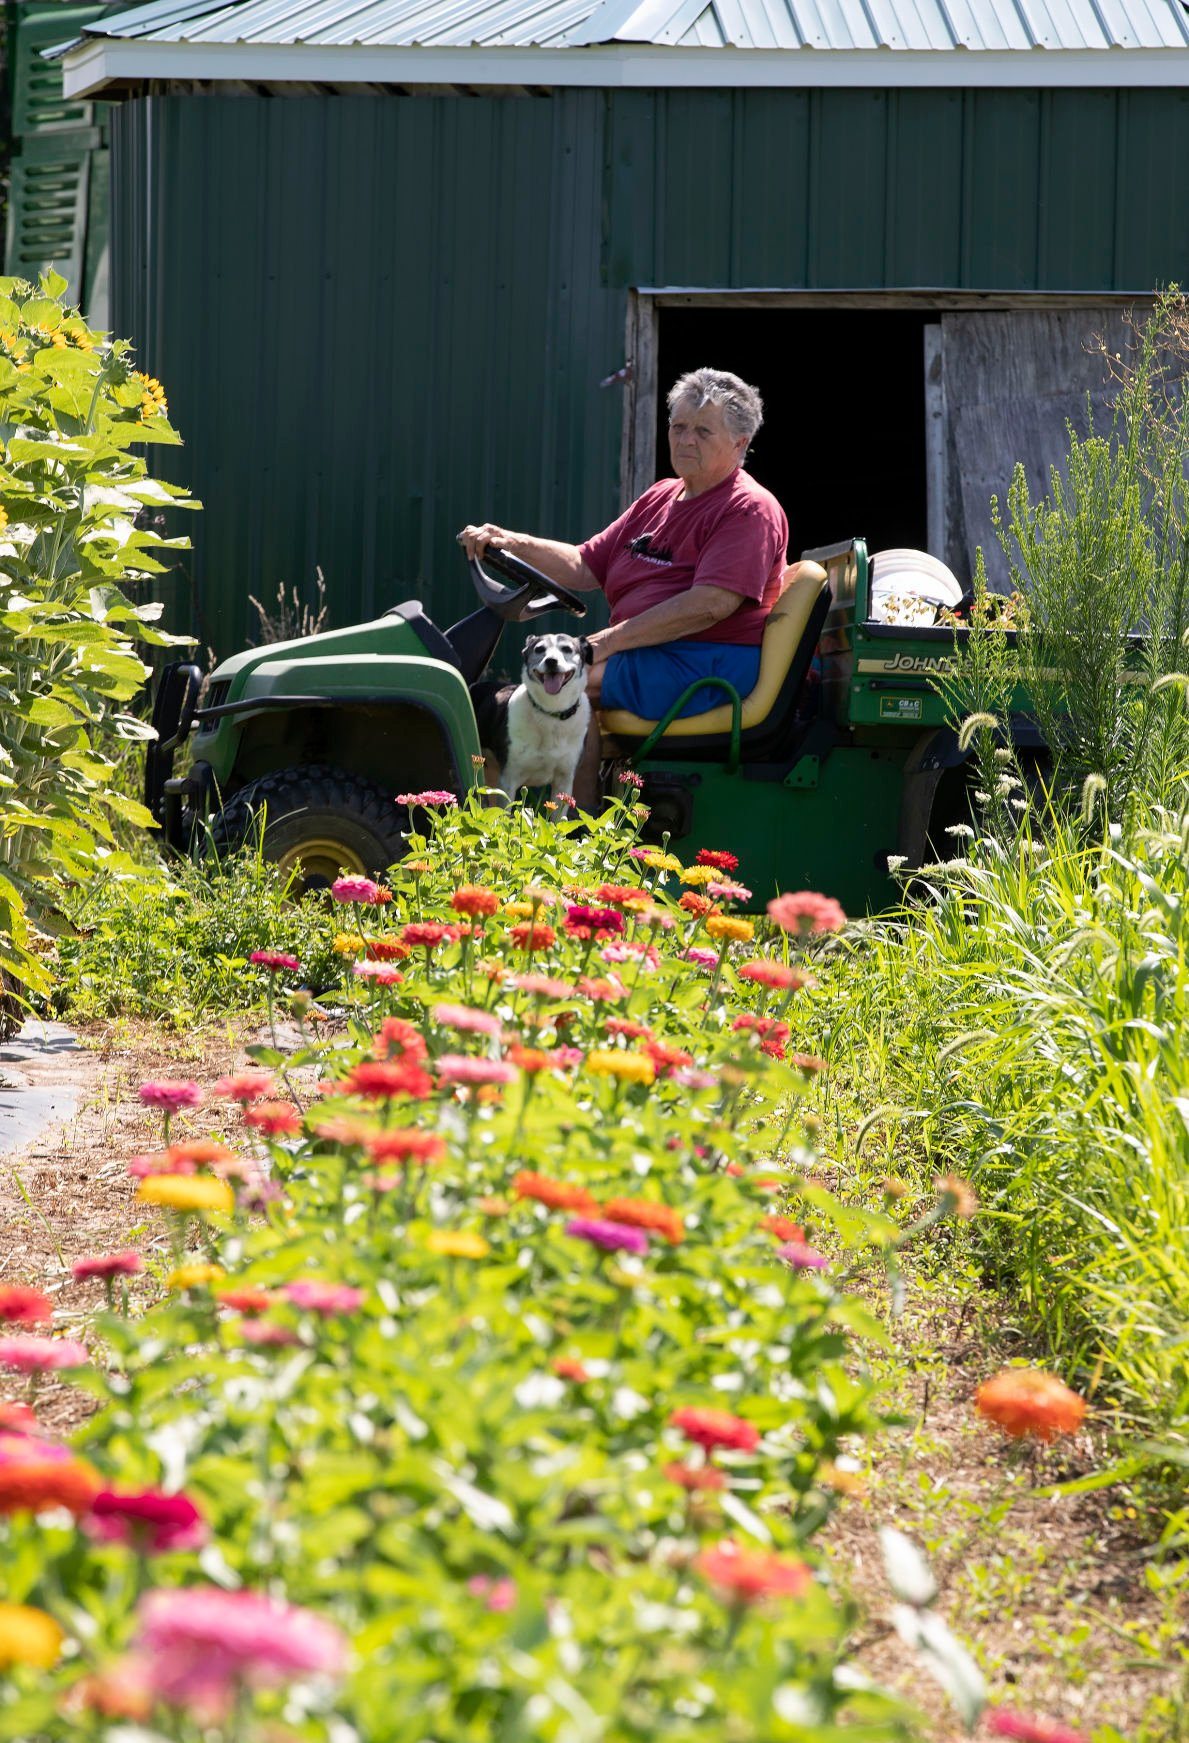 Carolann Kruse drives a utility vehicle past a flower garden on her family’s farm in rural Lancaster, Wis., on Wednesday, July 27, 2022.    PHOTO CREDIT: Stephen Gassman